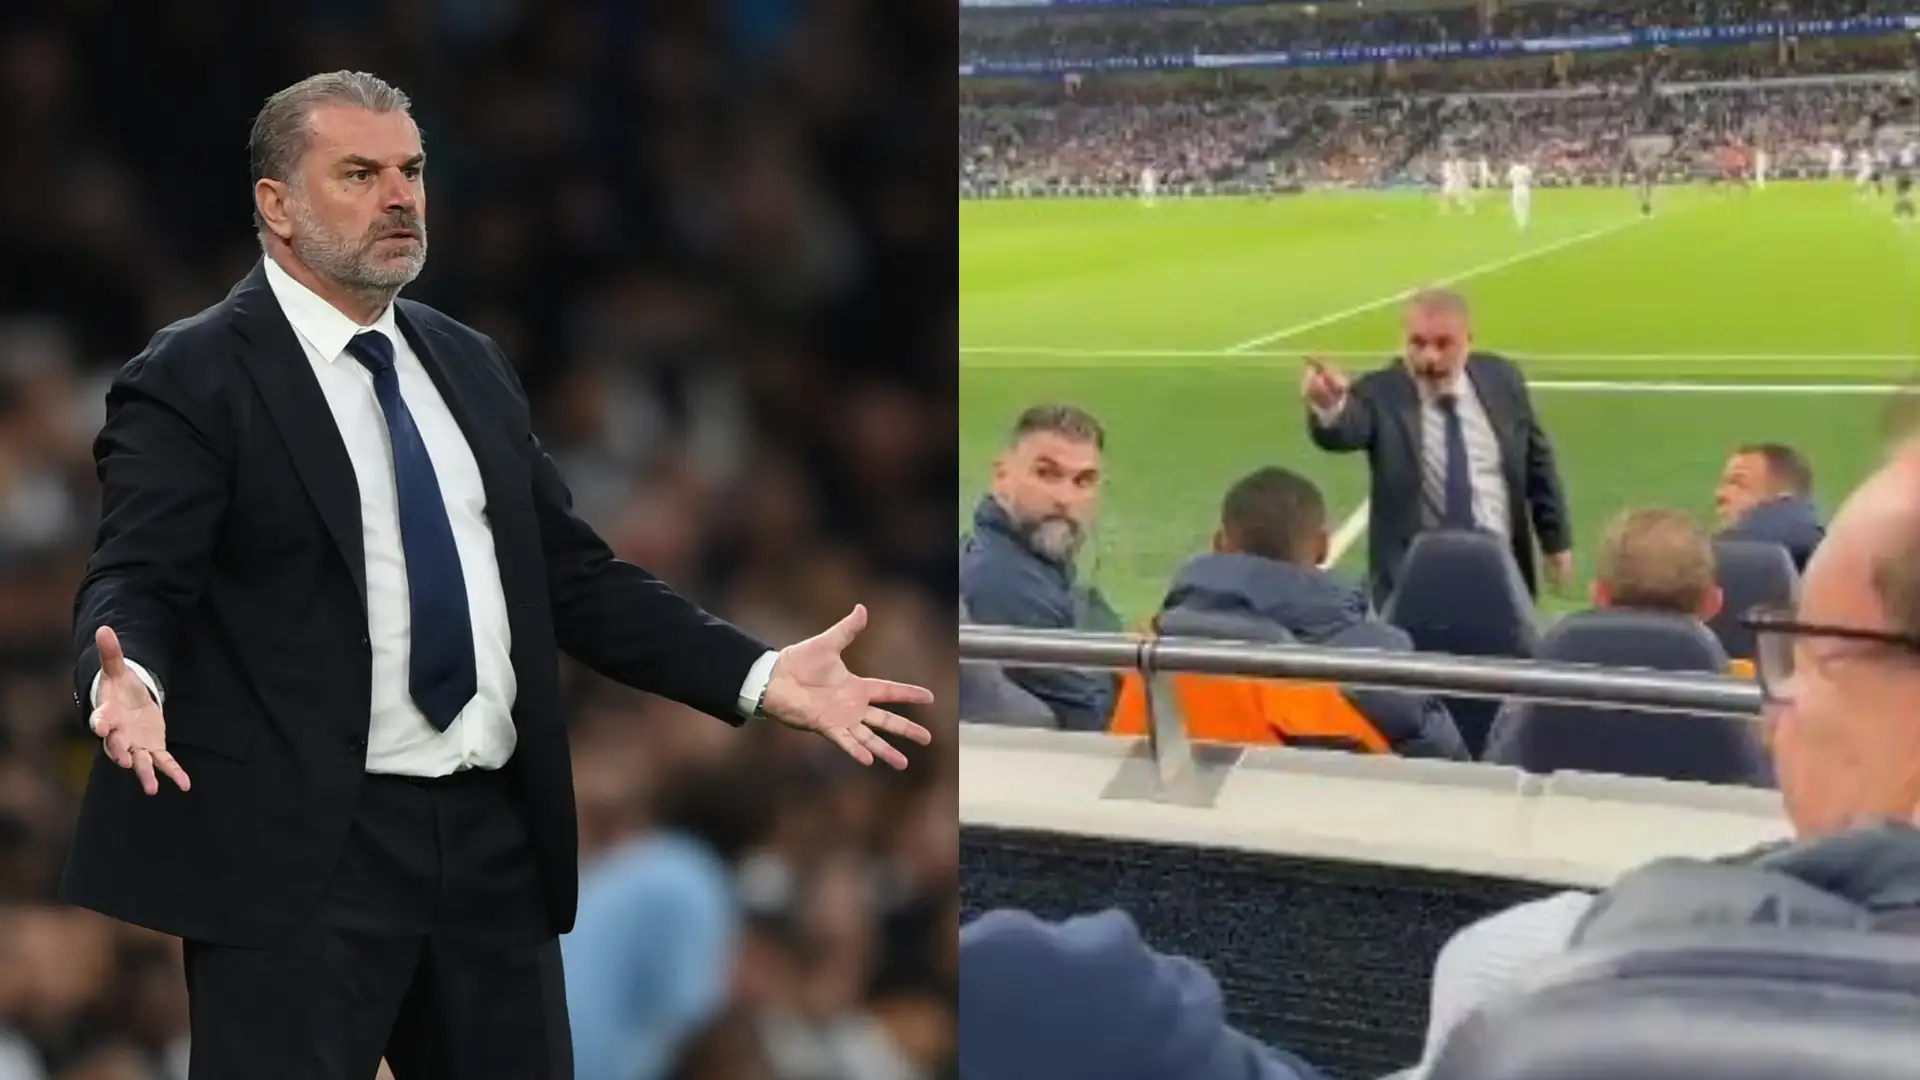 VIDEO: Angry Ange Postecoglou argues with Tottenham fan and admits 'foundations are really fragile' after defeat to Man City